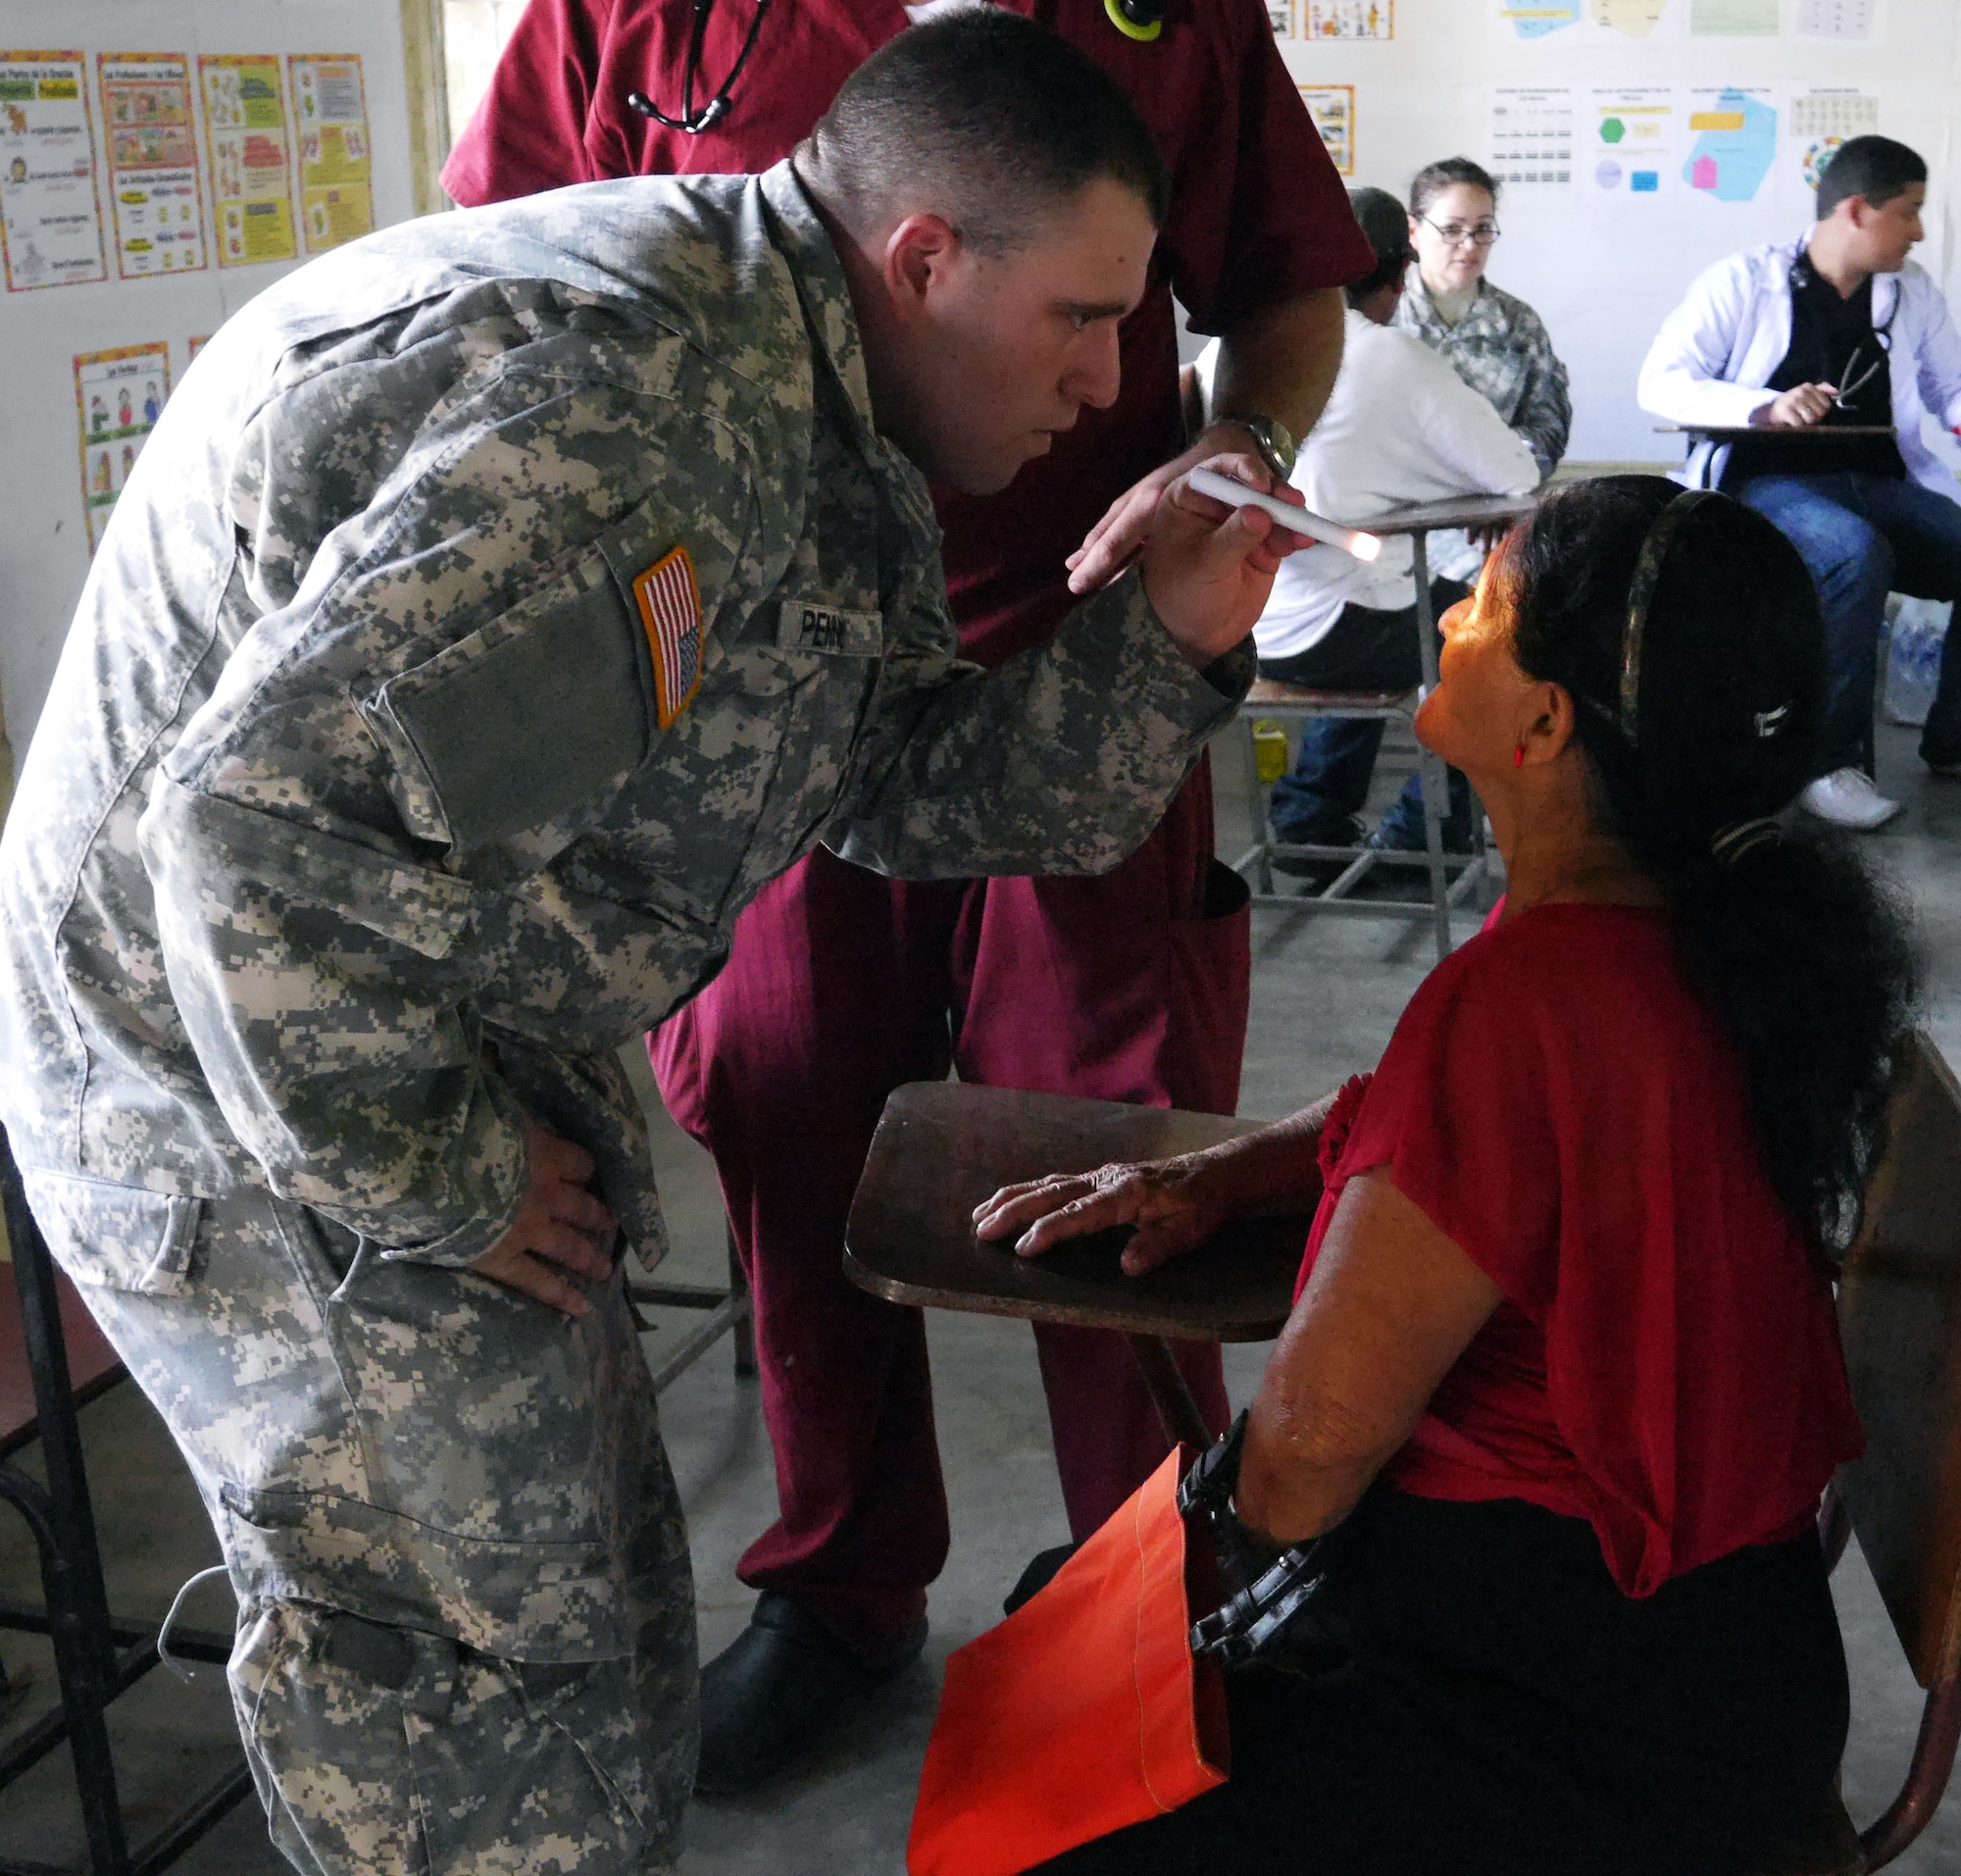 U.S. Army Sgt. Eric Penner examines a Honduran woman during a Medical Readiness Training Exercise (MEDRETE) conducted by Joint Task Force-Bravo's Medical Element (MEDEL) in the village of Kele Kele, Department of Puerto Cortes, Honduras, Feb. 26, 2014.  MEDEL, with support from JTF-Bravo Joint Security Forces, Army Forces Battalion, and the 1-228th Aviation Regiment, partnered with the Honduran Ministry of Health, the Honduran Red Cross, and the Honduran military to provide medical care to more than 1,100 people over two days in Kele Kele and Caoba, two remote villages in the Puerto Cortes region of Honduras.  (Photo by U.S. Army Sgt. Courtney Kreft)